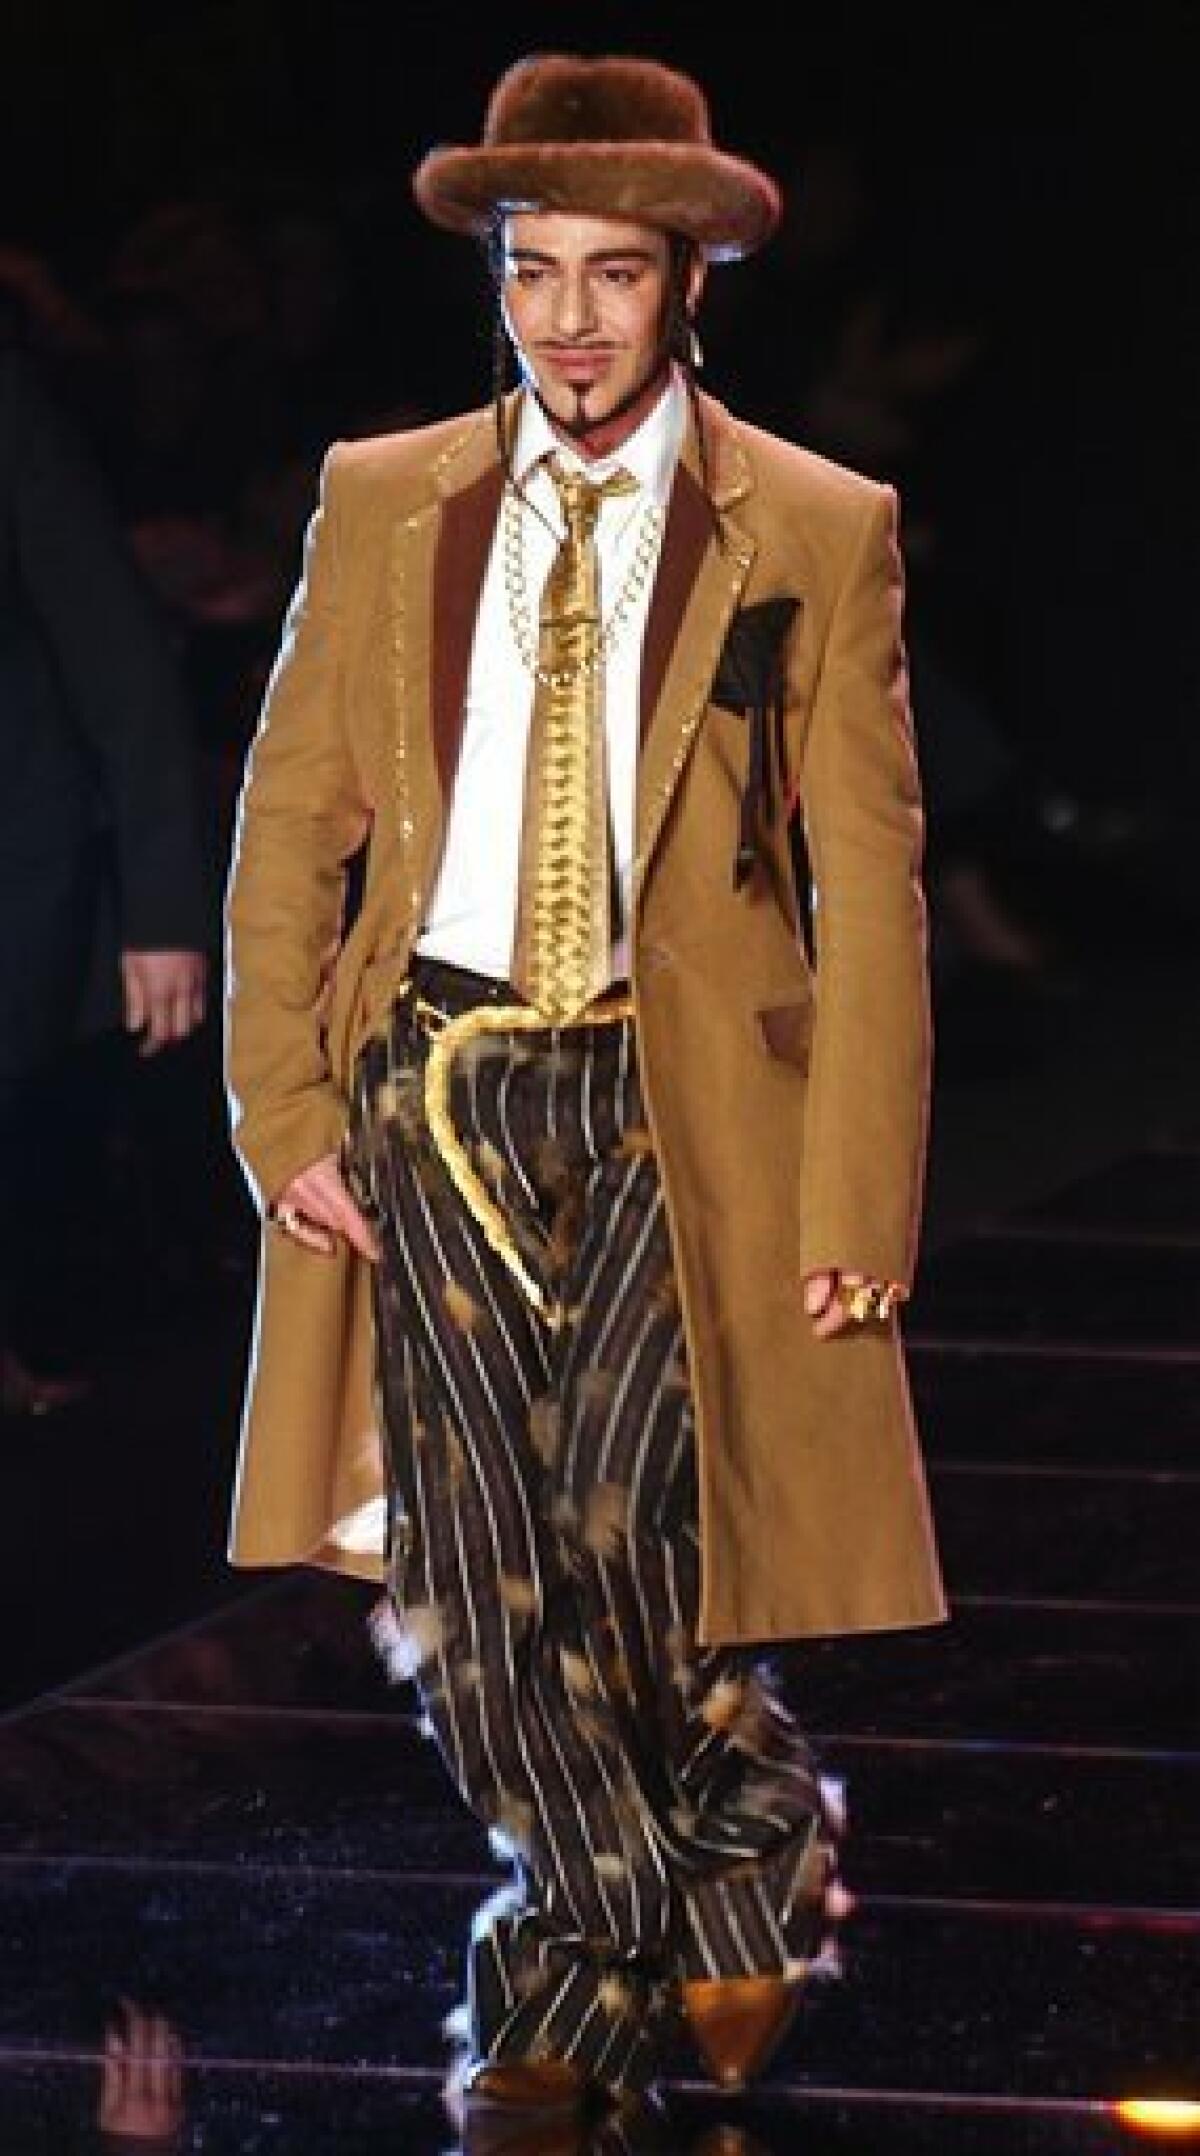 John Galliano sacked by Christian Dior over alleged antisemitic